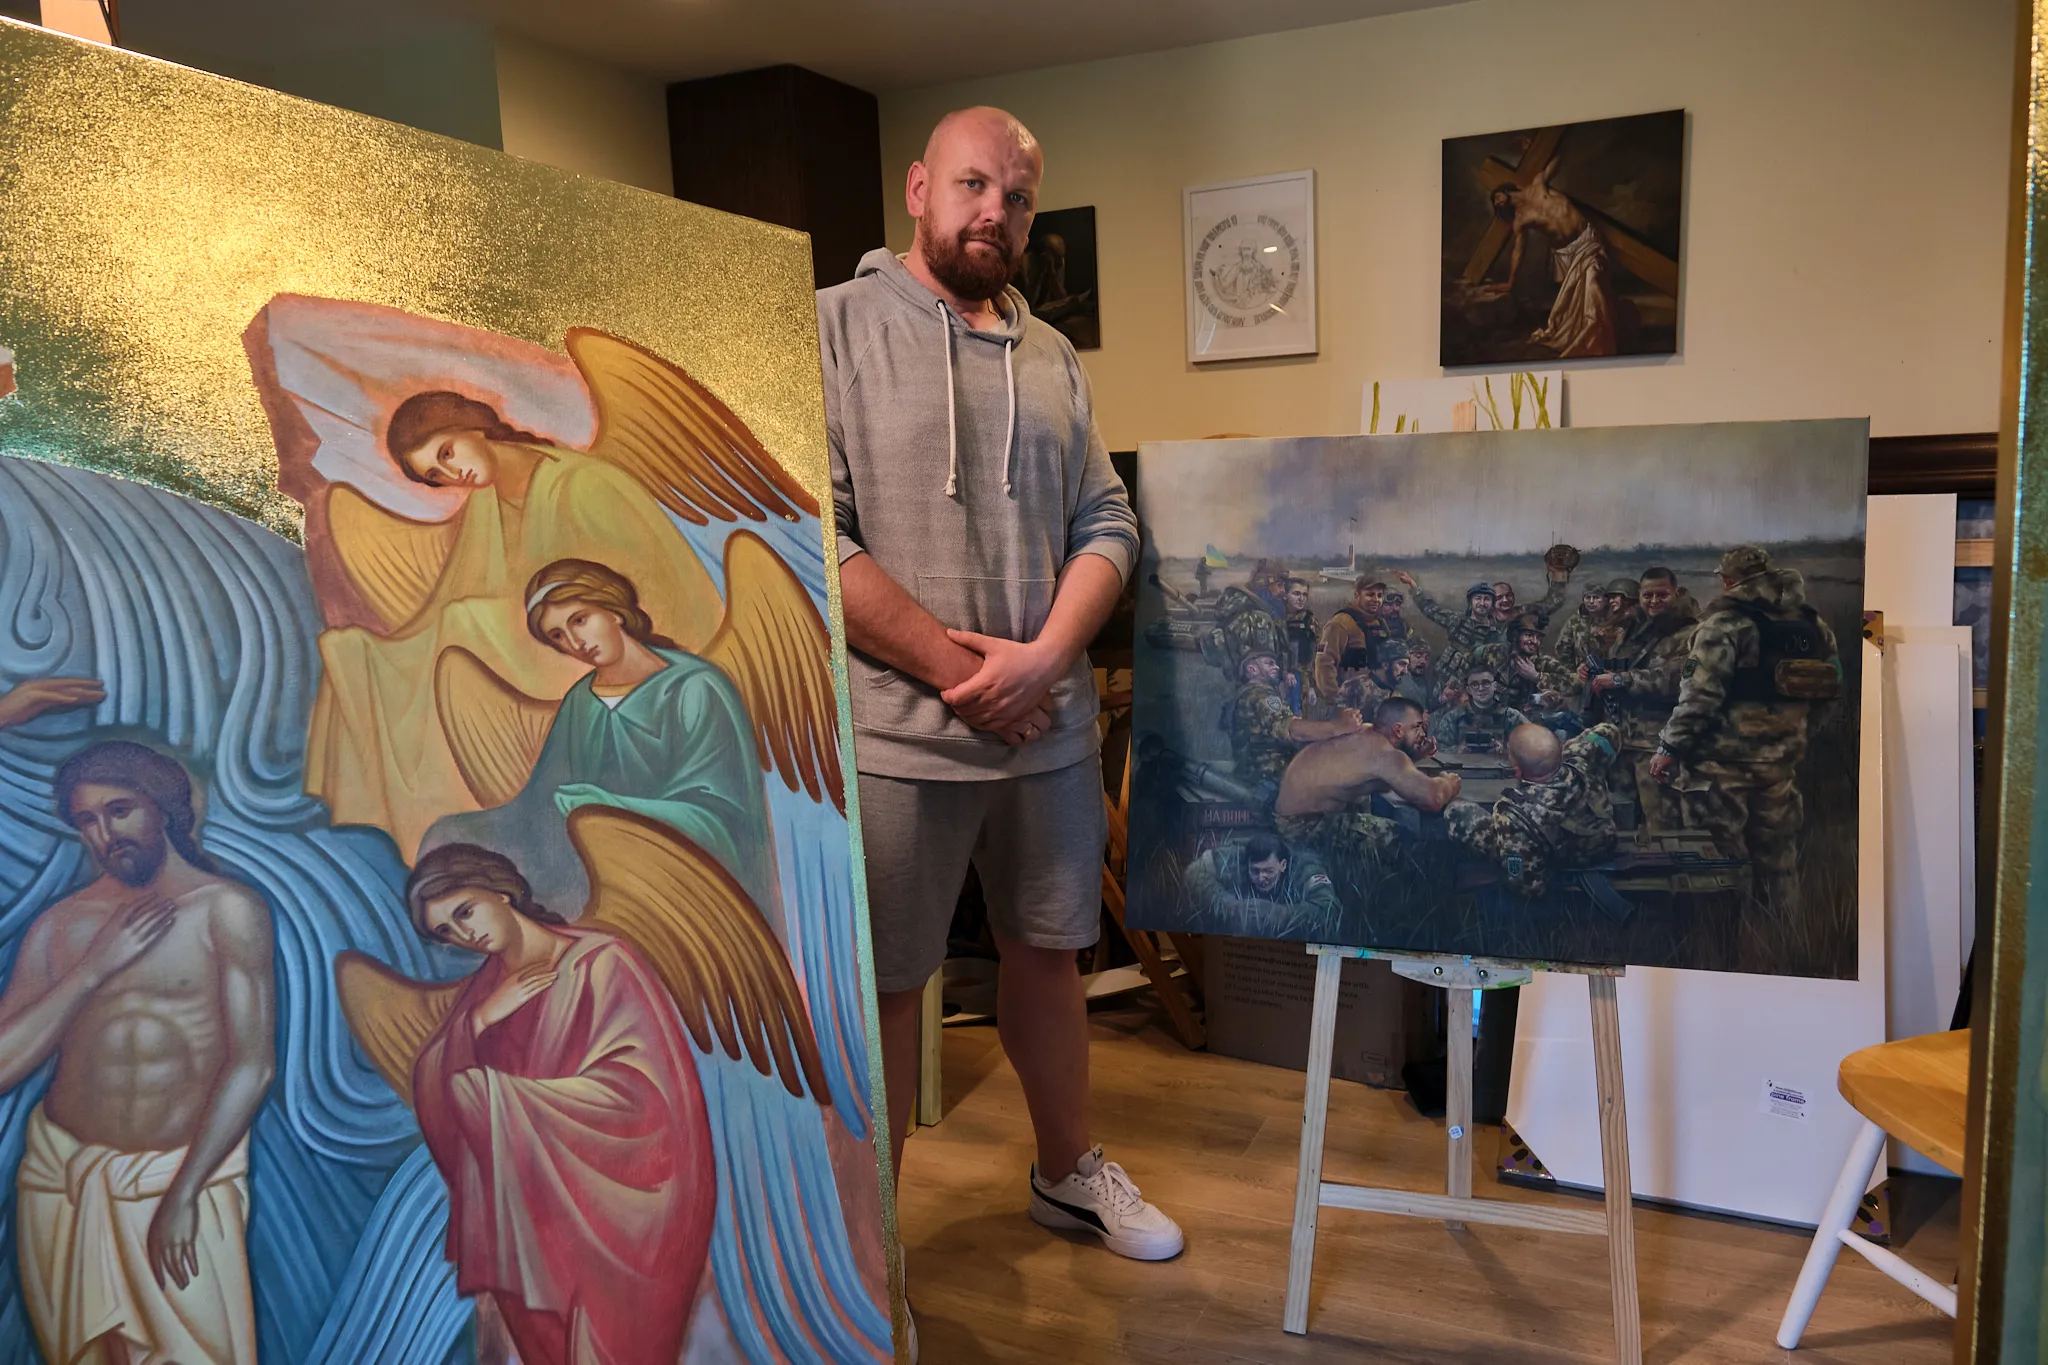 Ukrainian refugee and artist Serhii Kolodka in his studio at Holy Eucharist Ukrainian Catholic Cathedral, where he is putting the finishing touches on two large icons destined for Holy Spirit Parish in New Westminster, British Columbia, Canada.?w=200&h=150